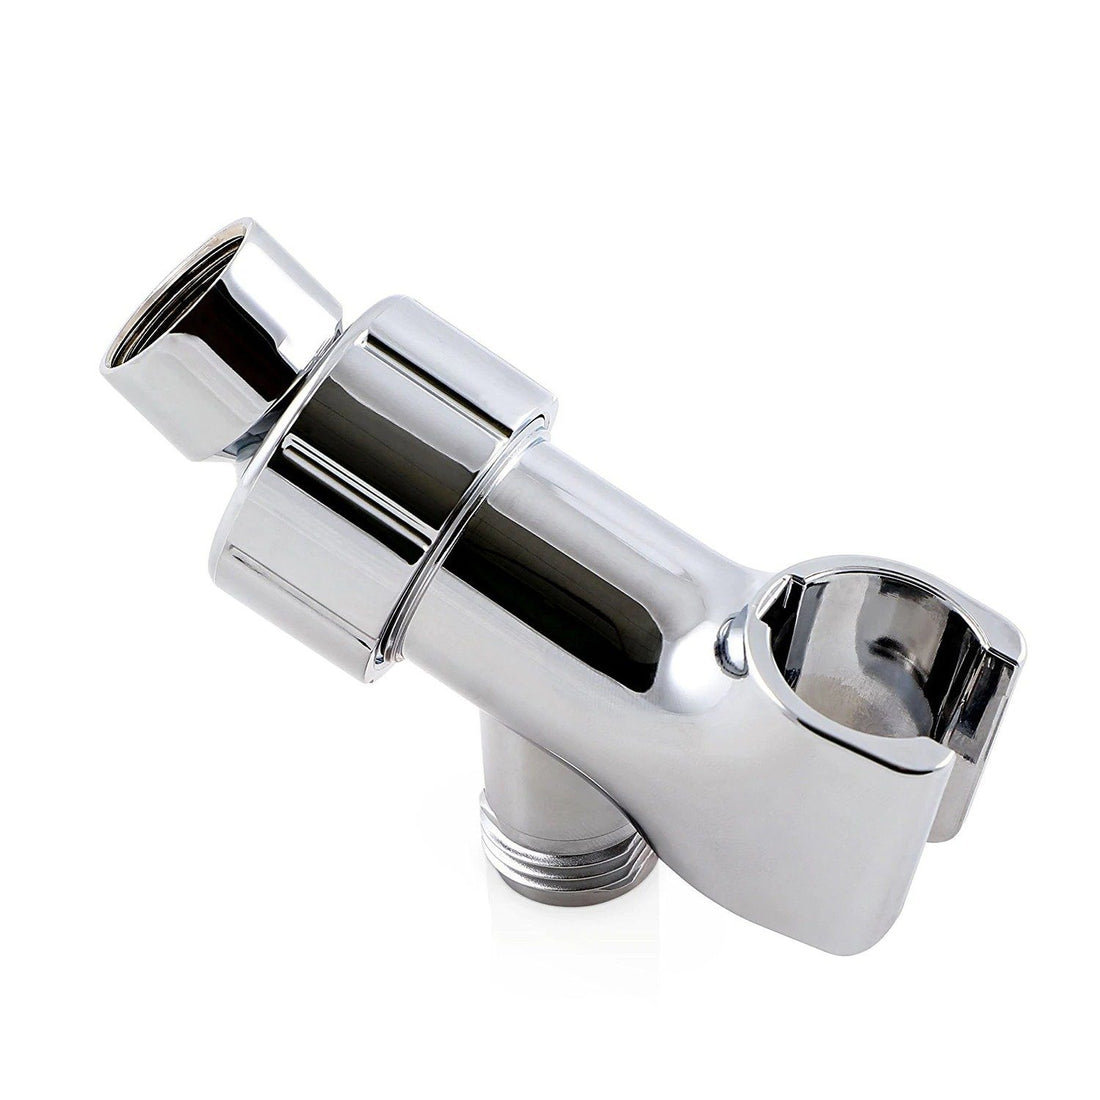 https://cdn.shopify.com/s/files/1/0523/6277/2641/products/shower-arm-mounted-shower-head-holder-ad_main-1.jpg?v=1624681835&width=1100